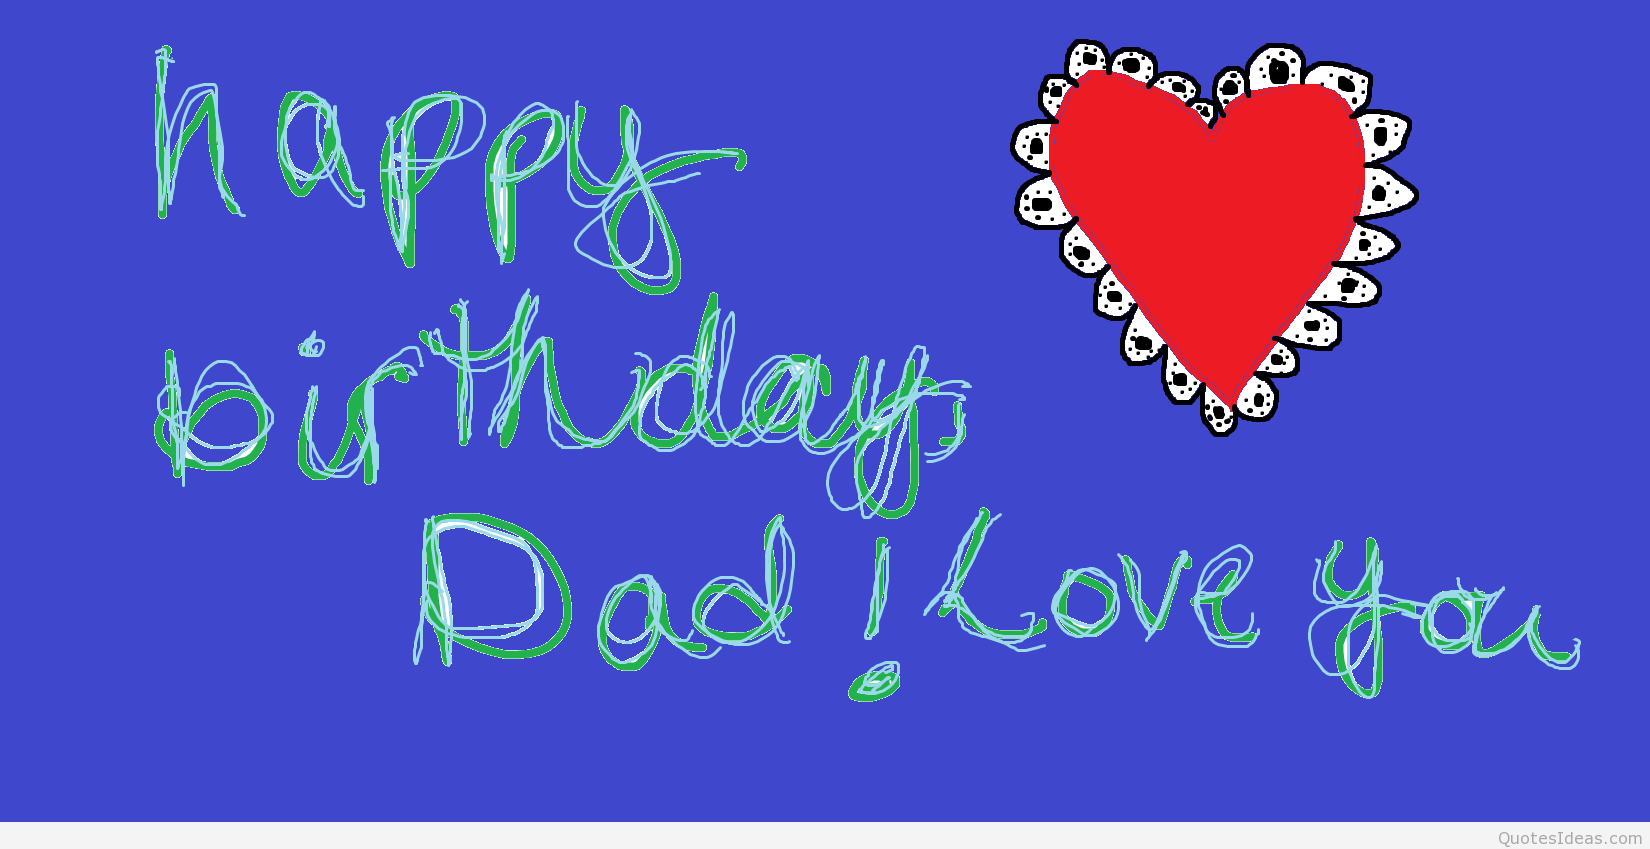 happy-birthday-dad-father-hd-wallpapers